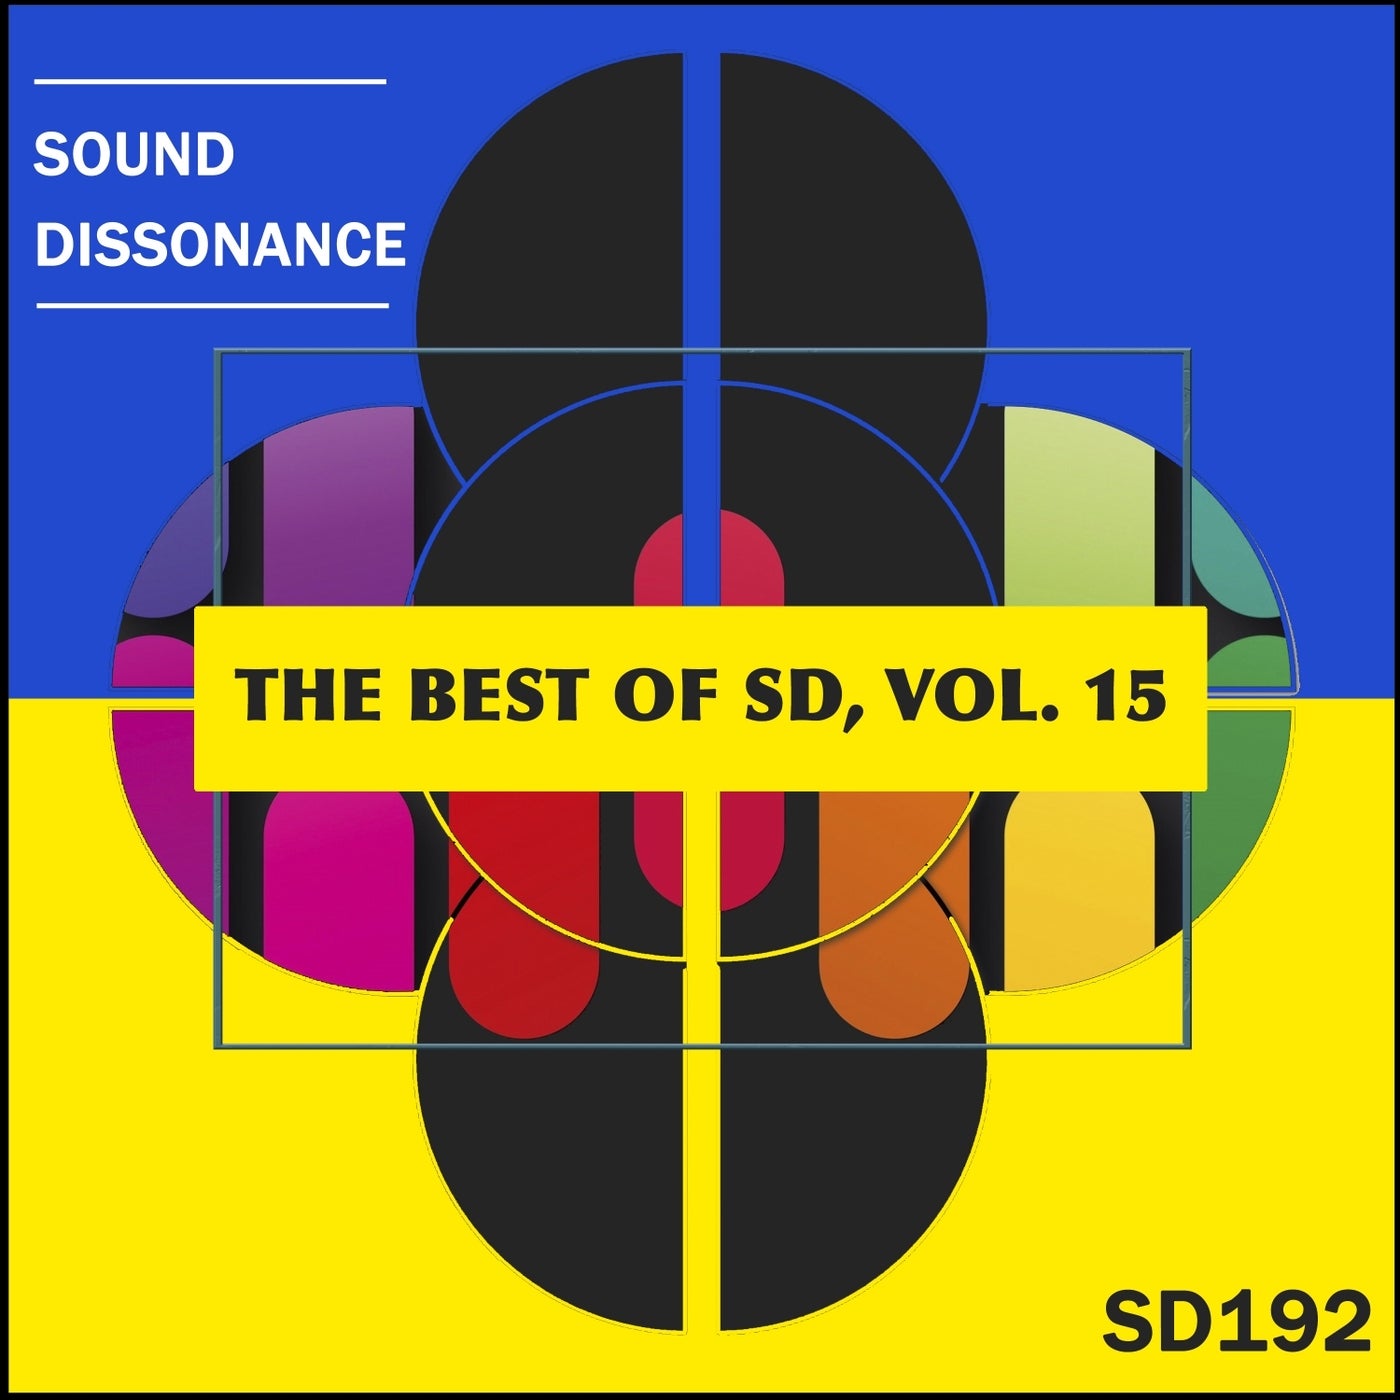 Puncher, V.O.Y – The Best of Sd, Vol. 15 [SD192]